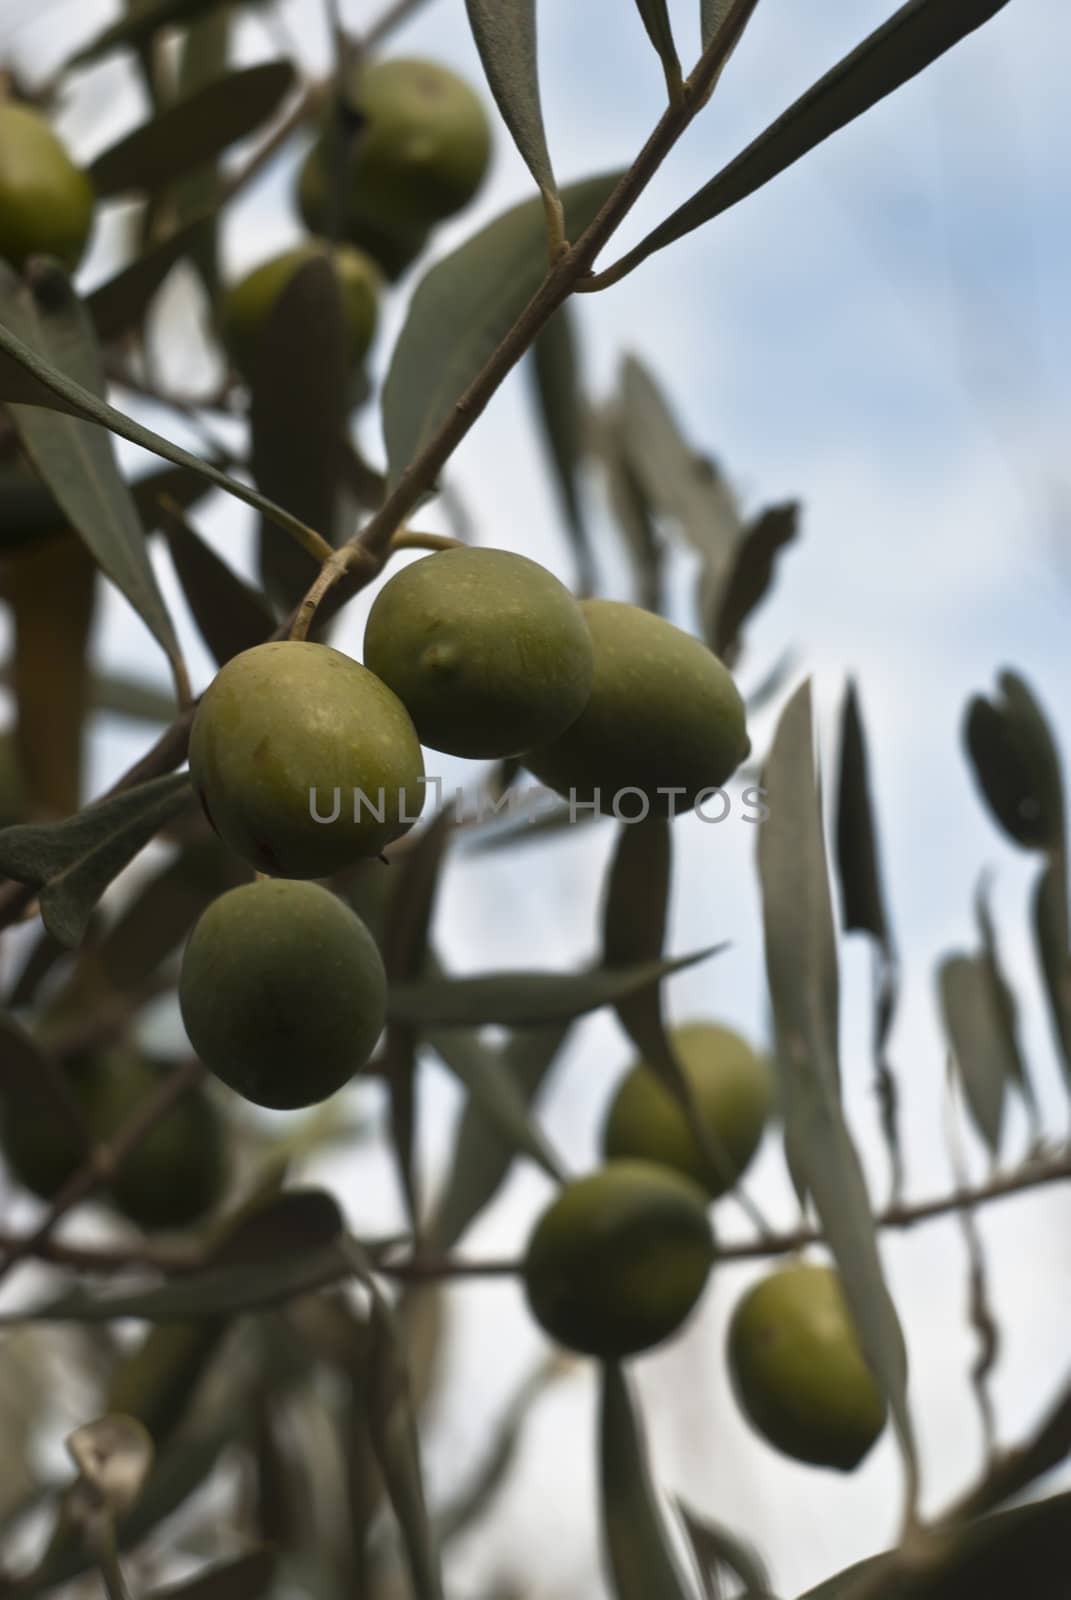 Sicilian green olives on the tree.